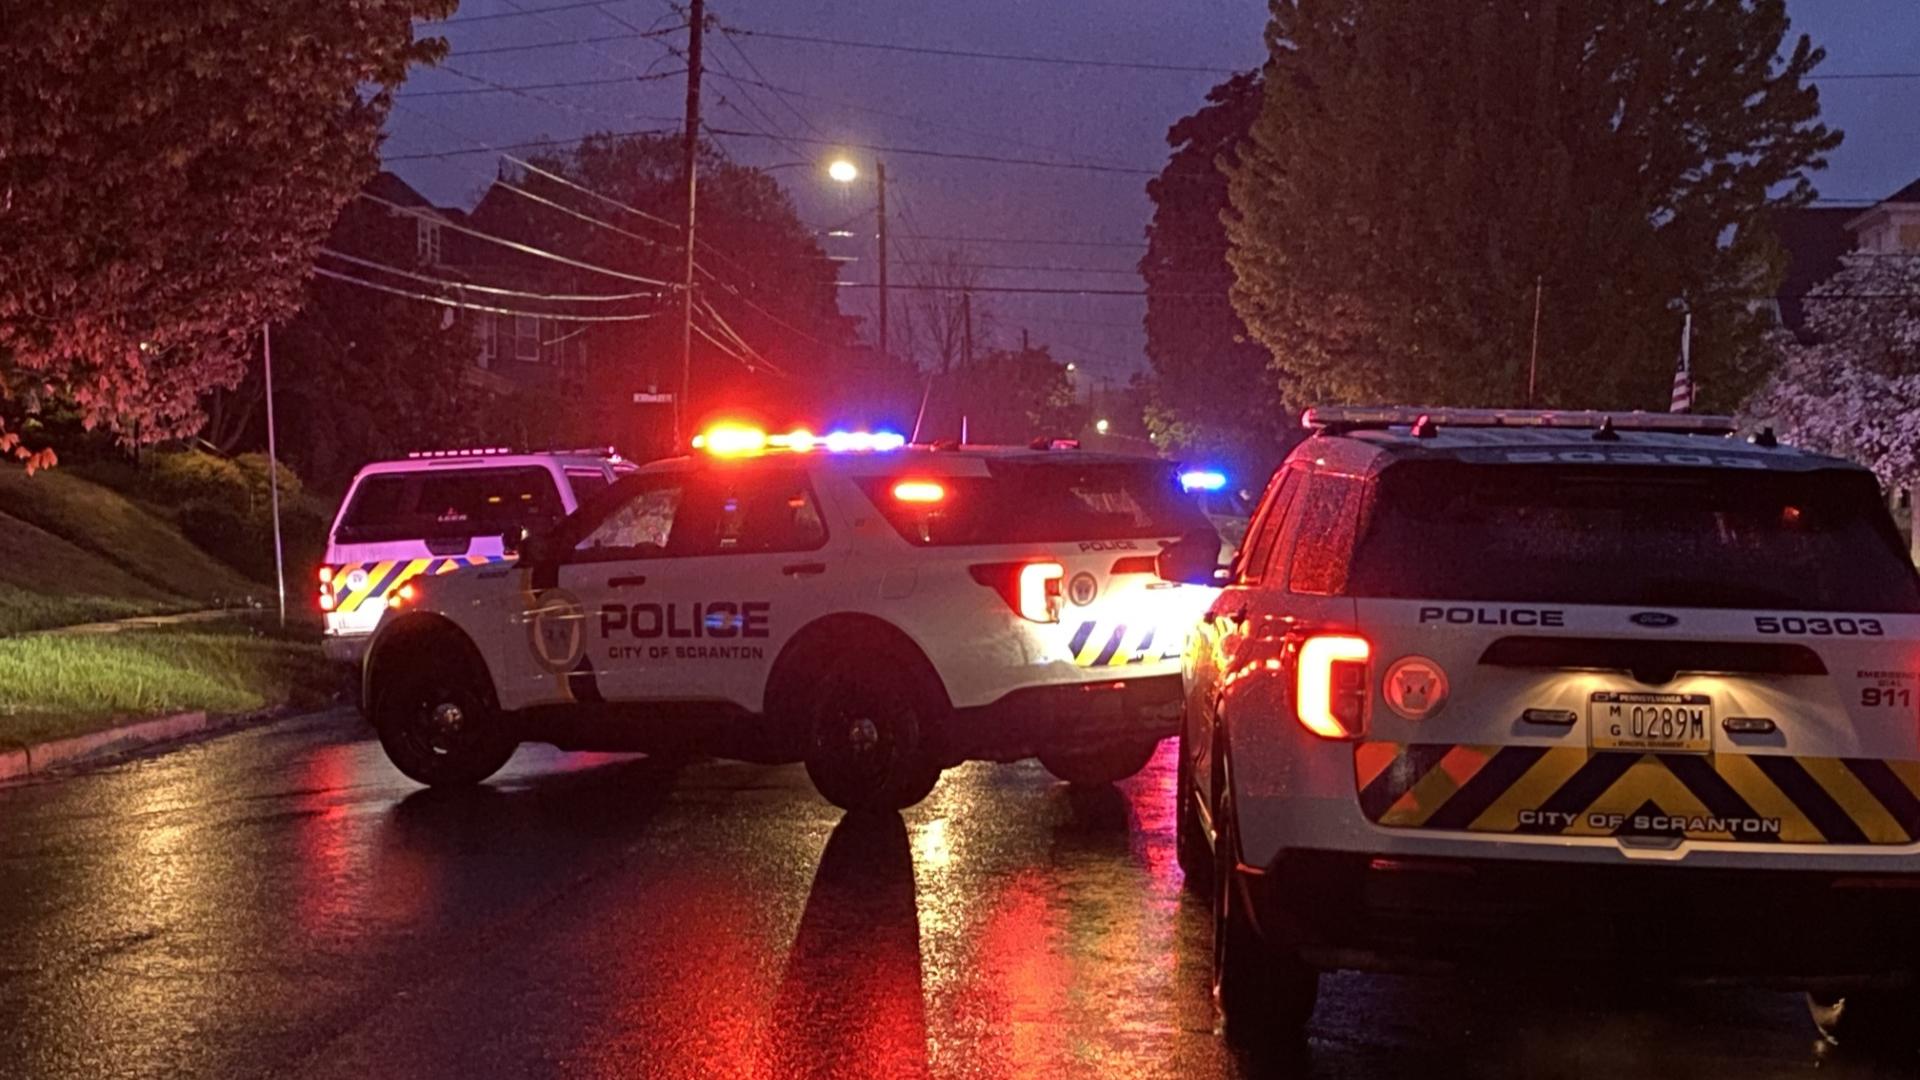 Officers responded to Oram Street and North Bromley Avenue in Scranton around 7:30 p.m. Saturday.